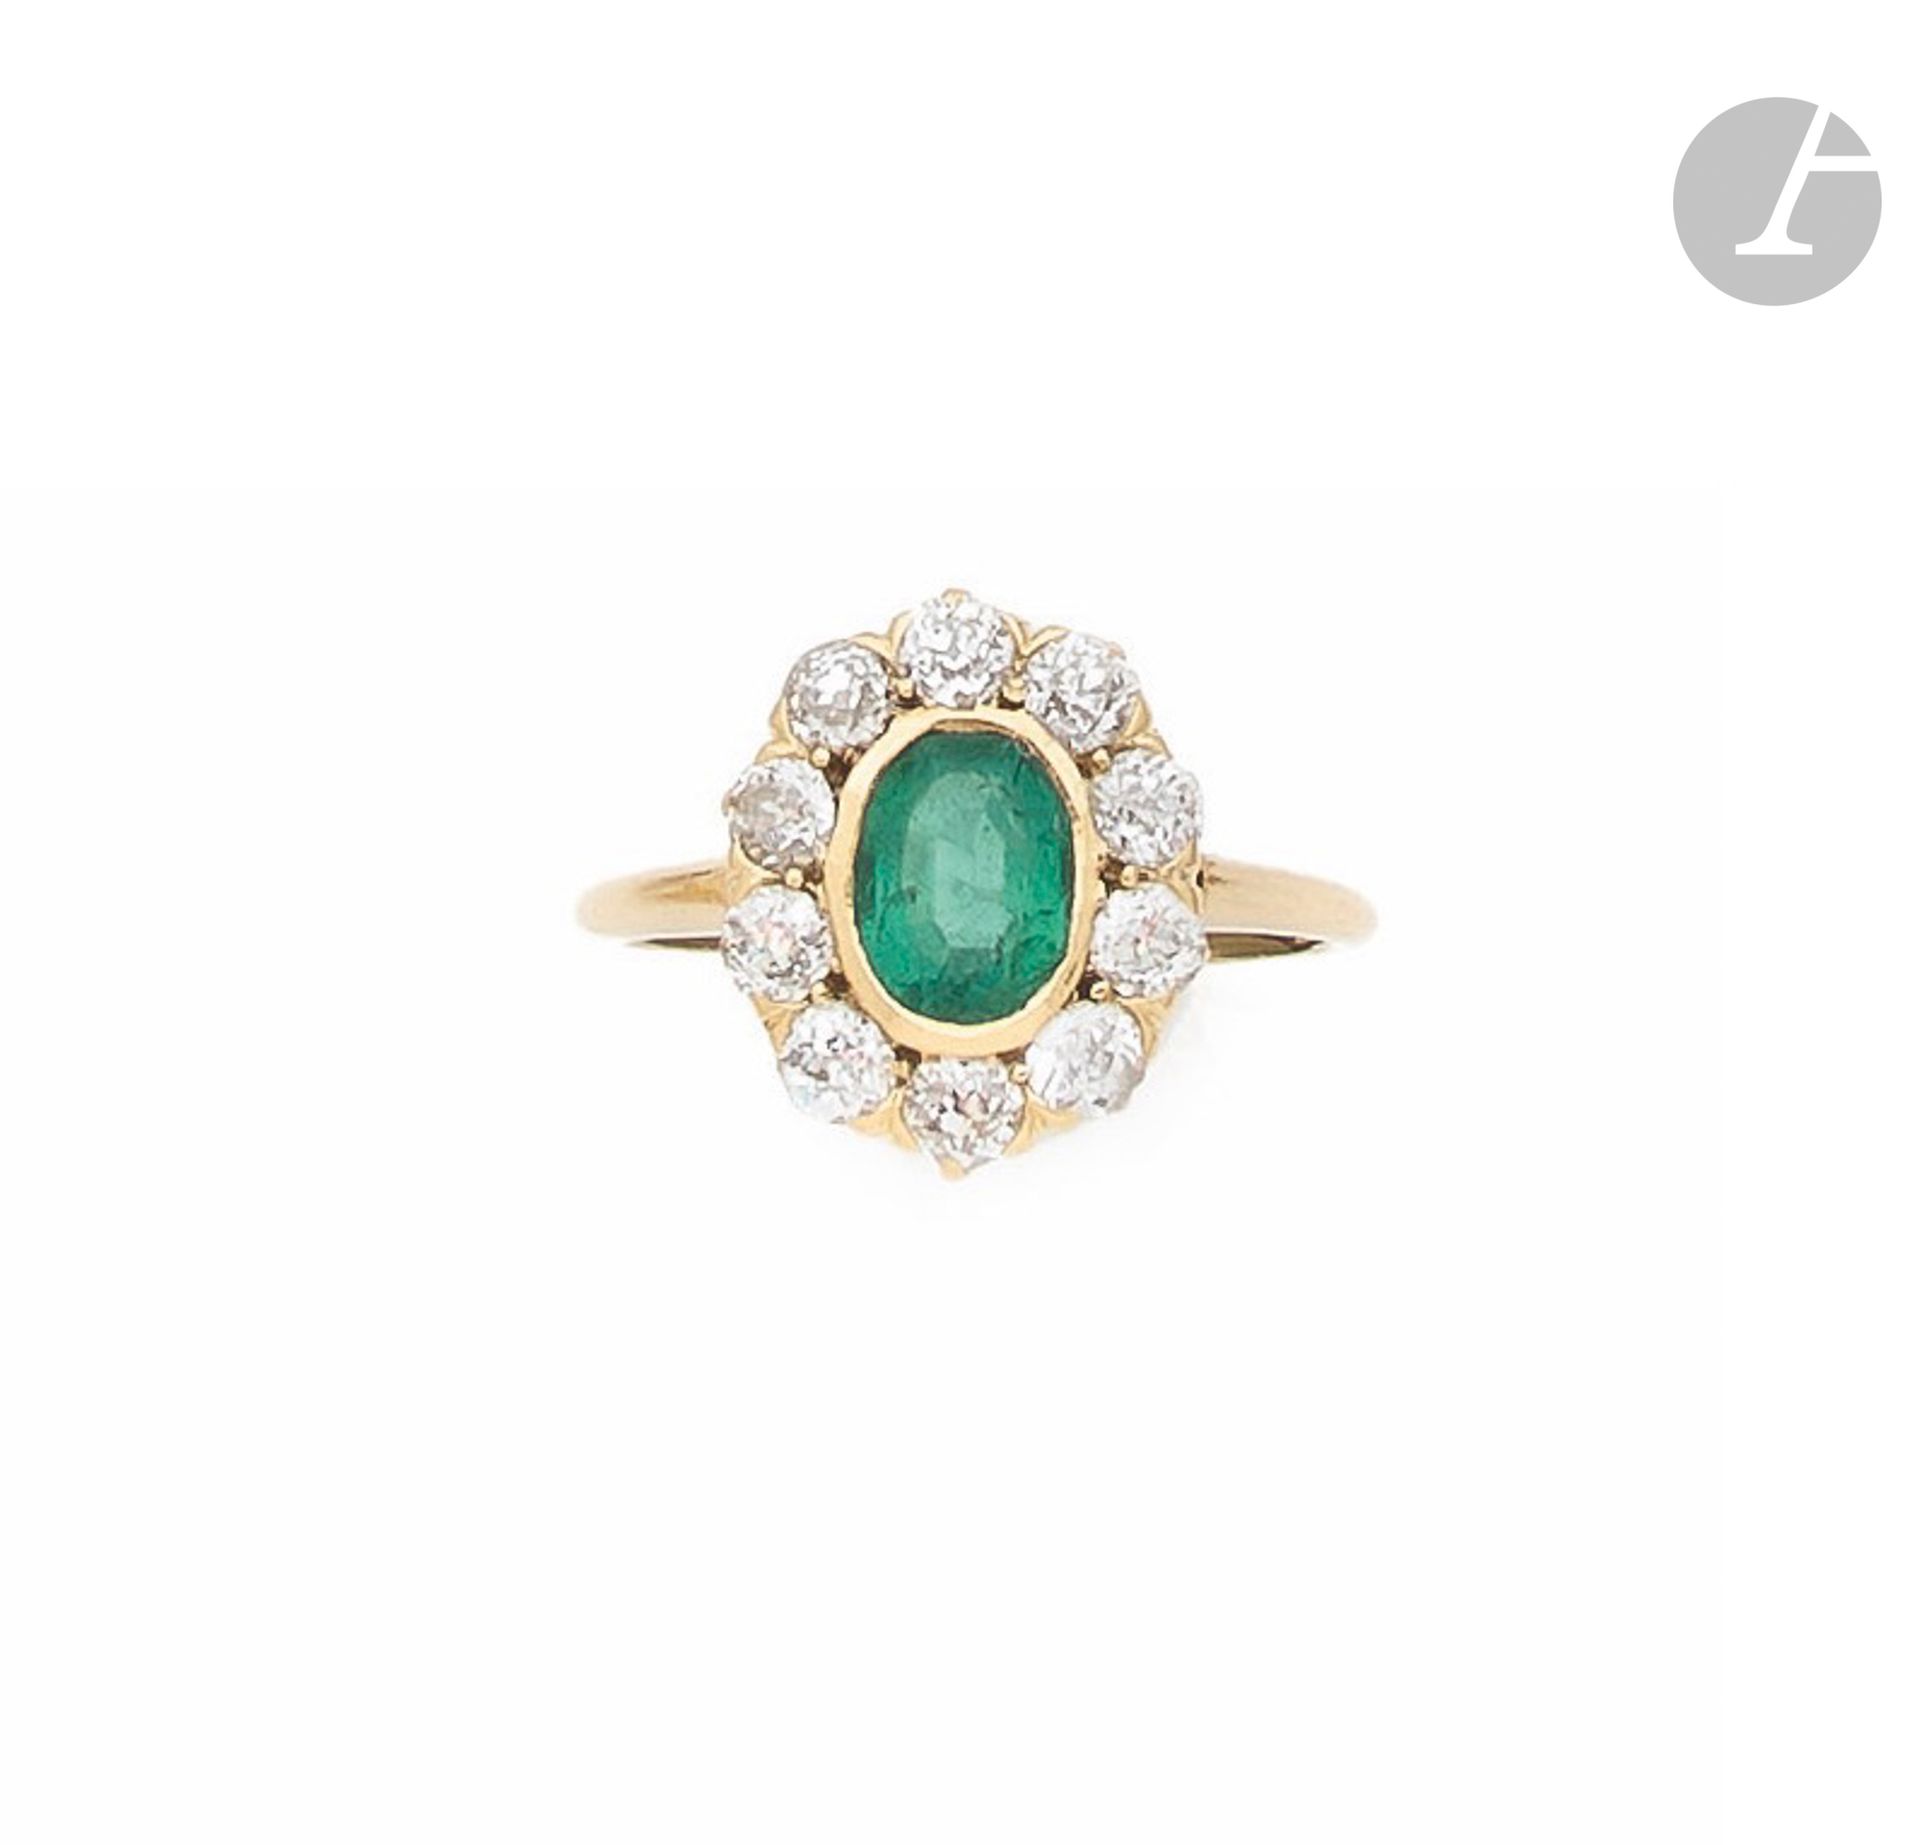 Null 14K (585) gold ring, set with an oval emerald surrounded by 10 round old-cu&hellip;